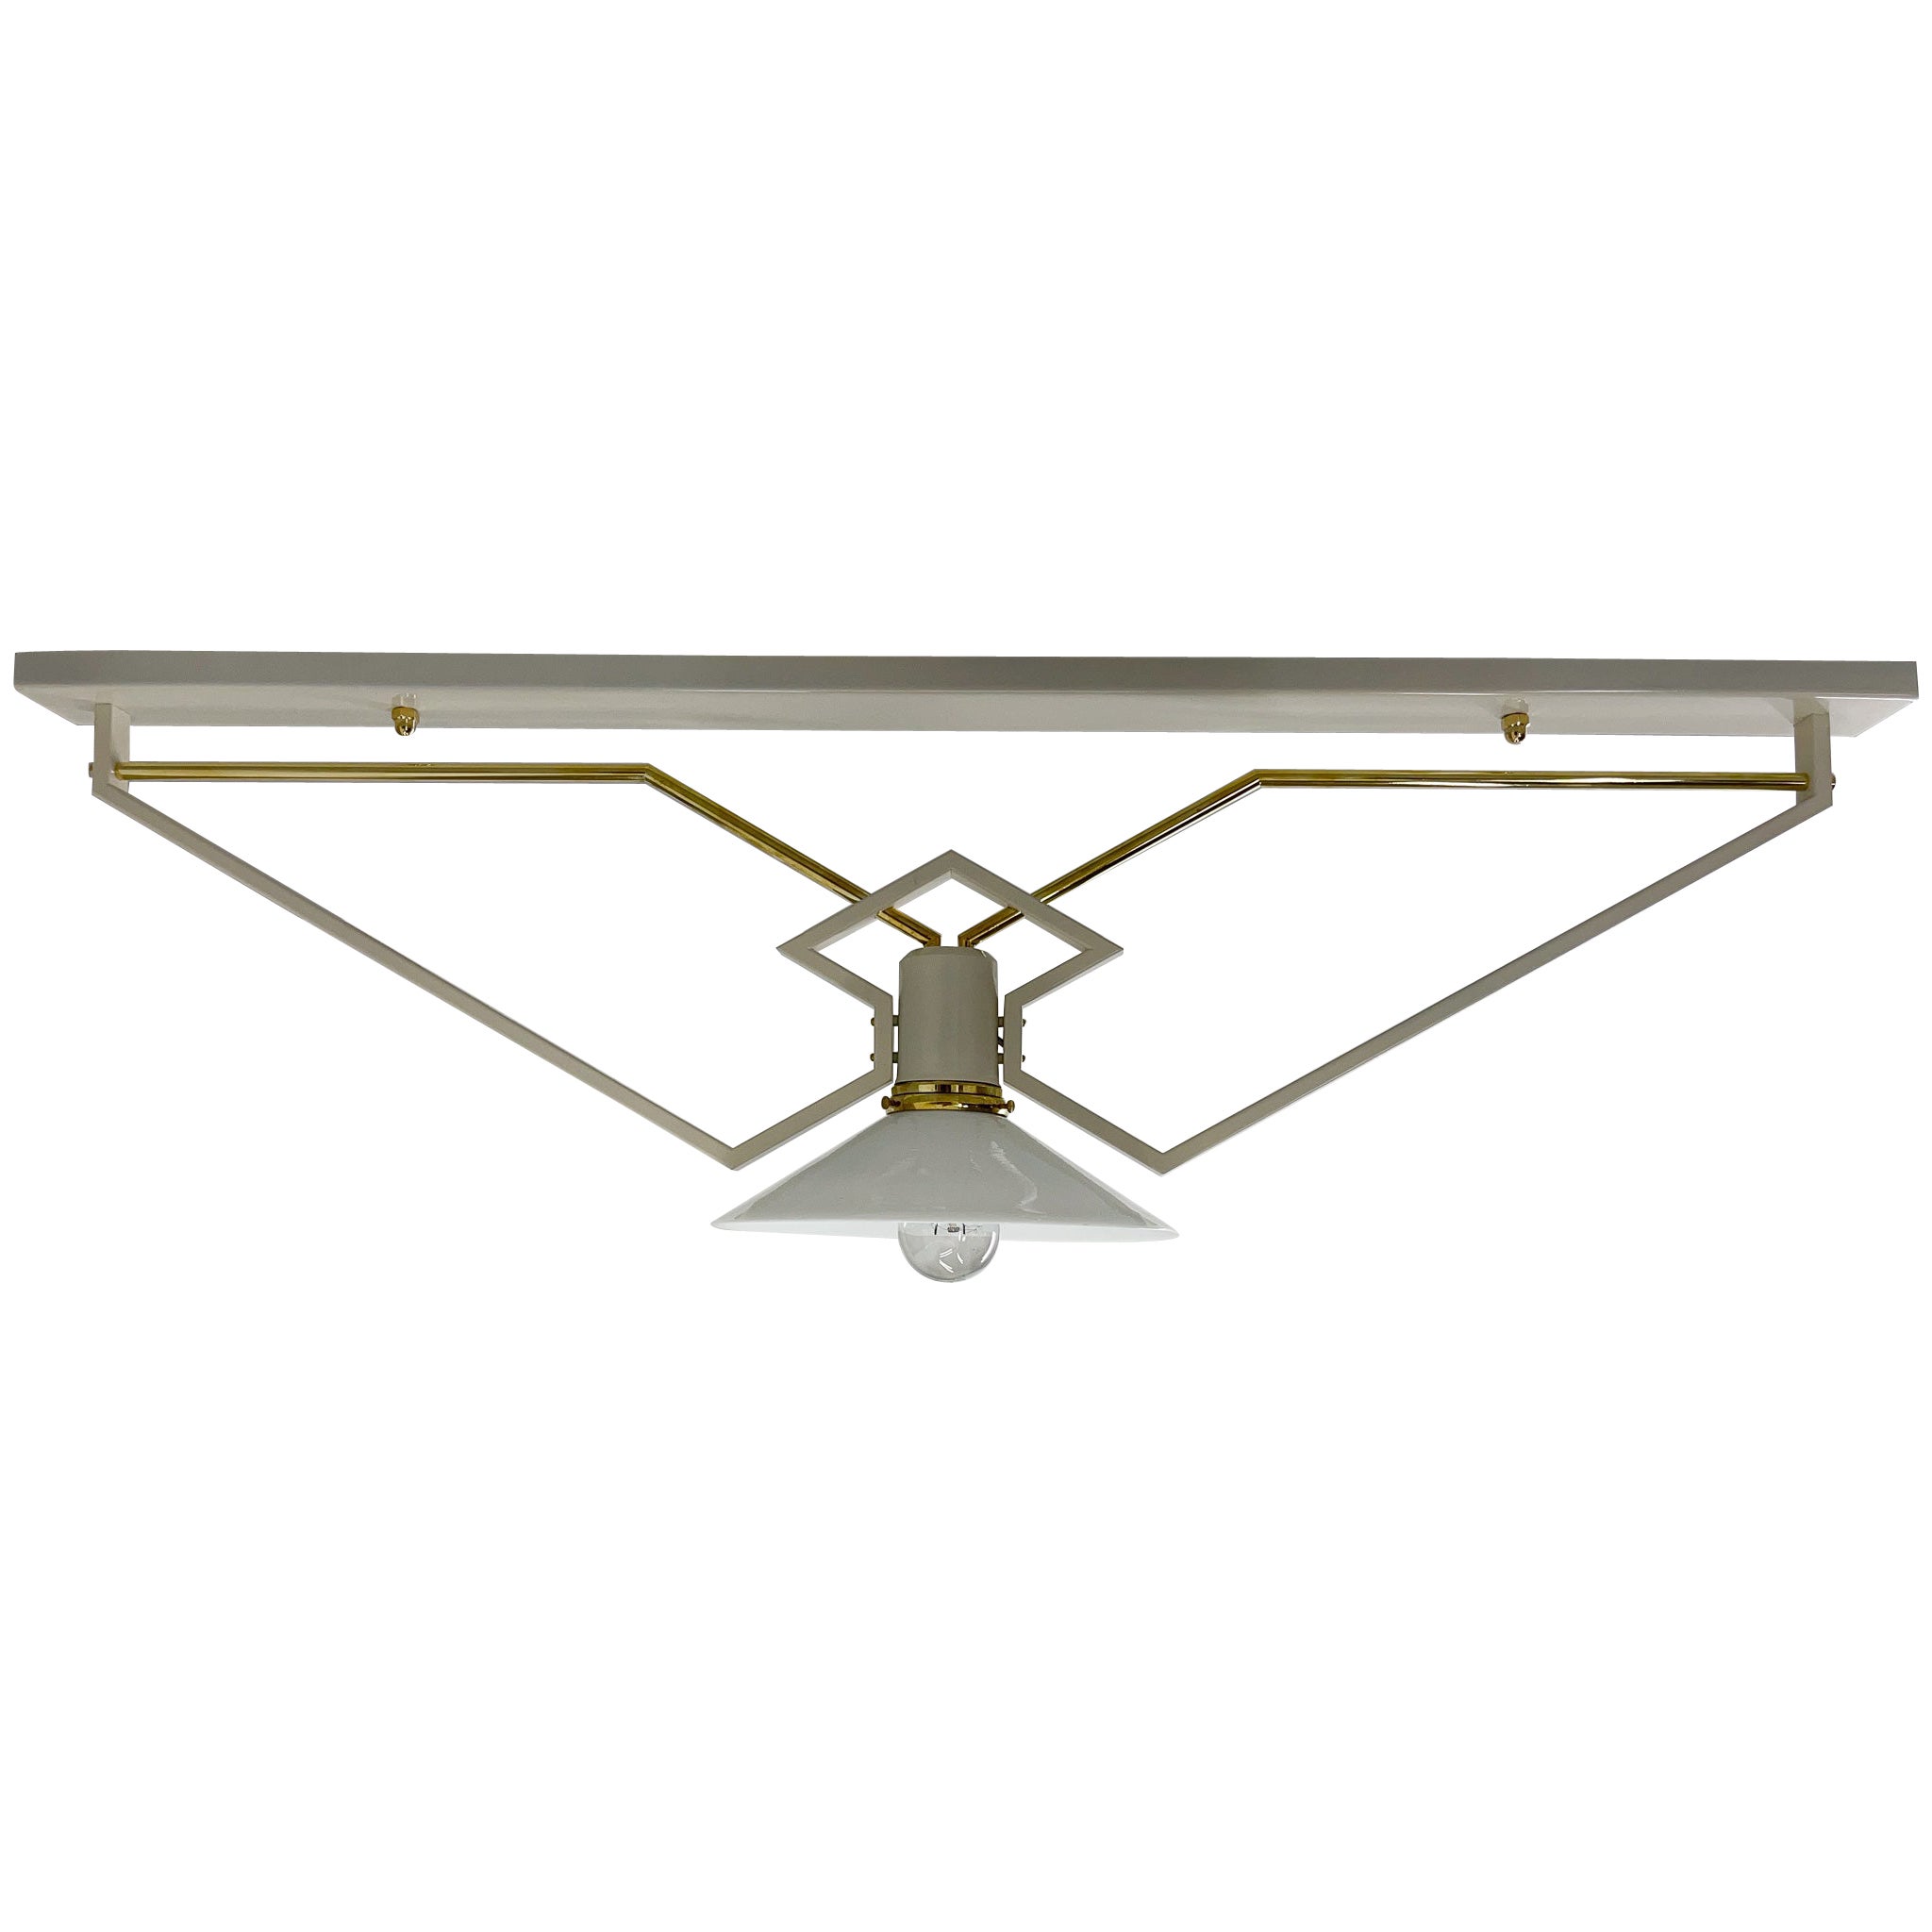 1950s Unique Ceiling Lights with Brass Details, Restored, 4 pieces available